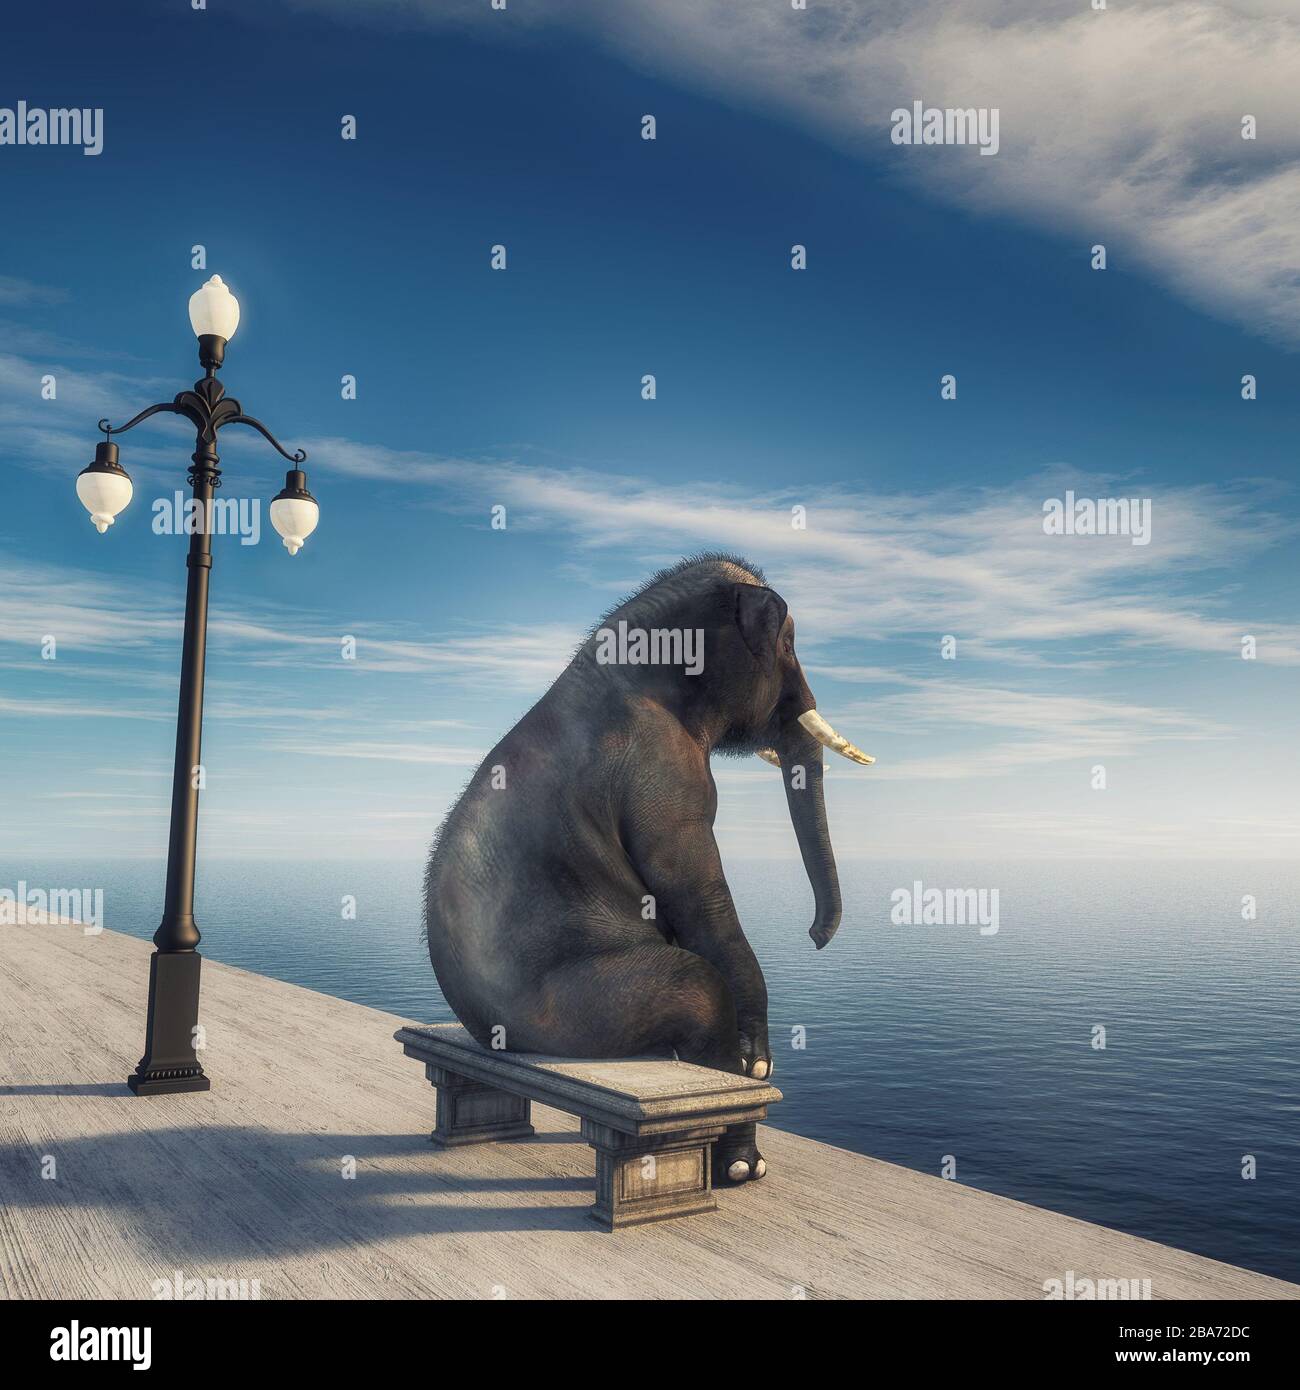 Elephant sitting on bench at seafront admiring the view . This is a 3d render illustration . Stock Photo